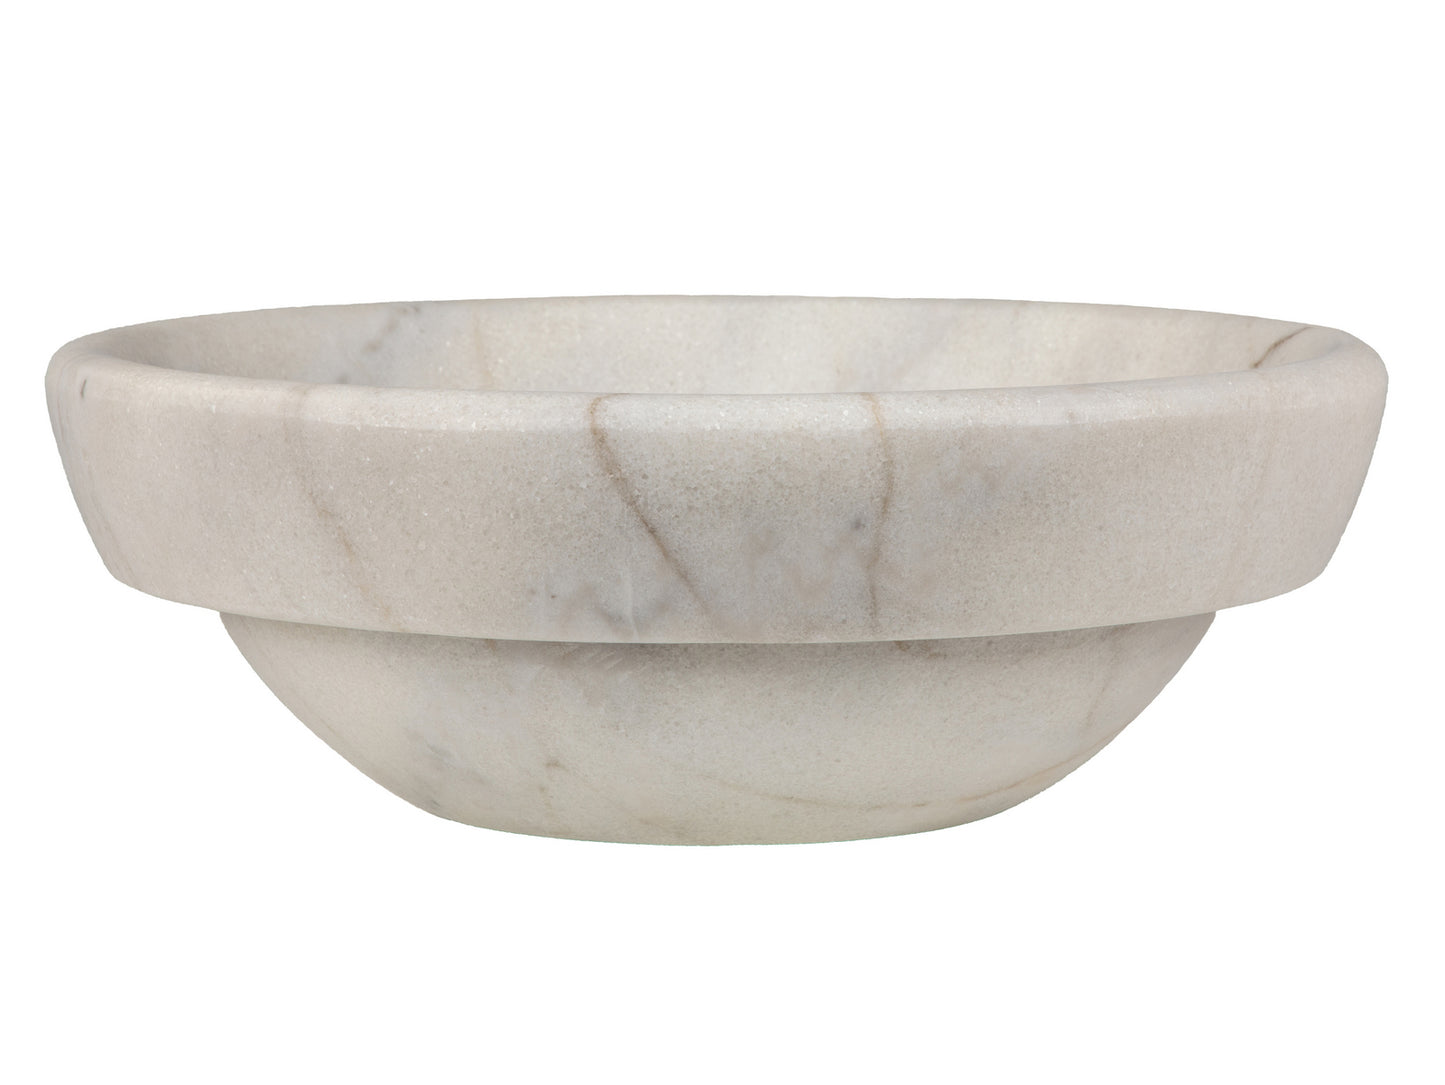 Echo Bowl Shaped Vessel Sink - Honed White Marble